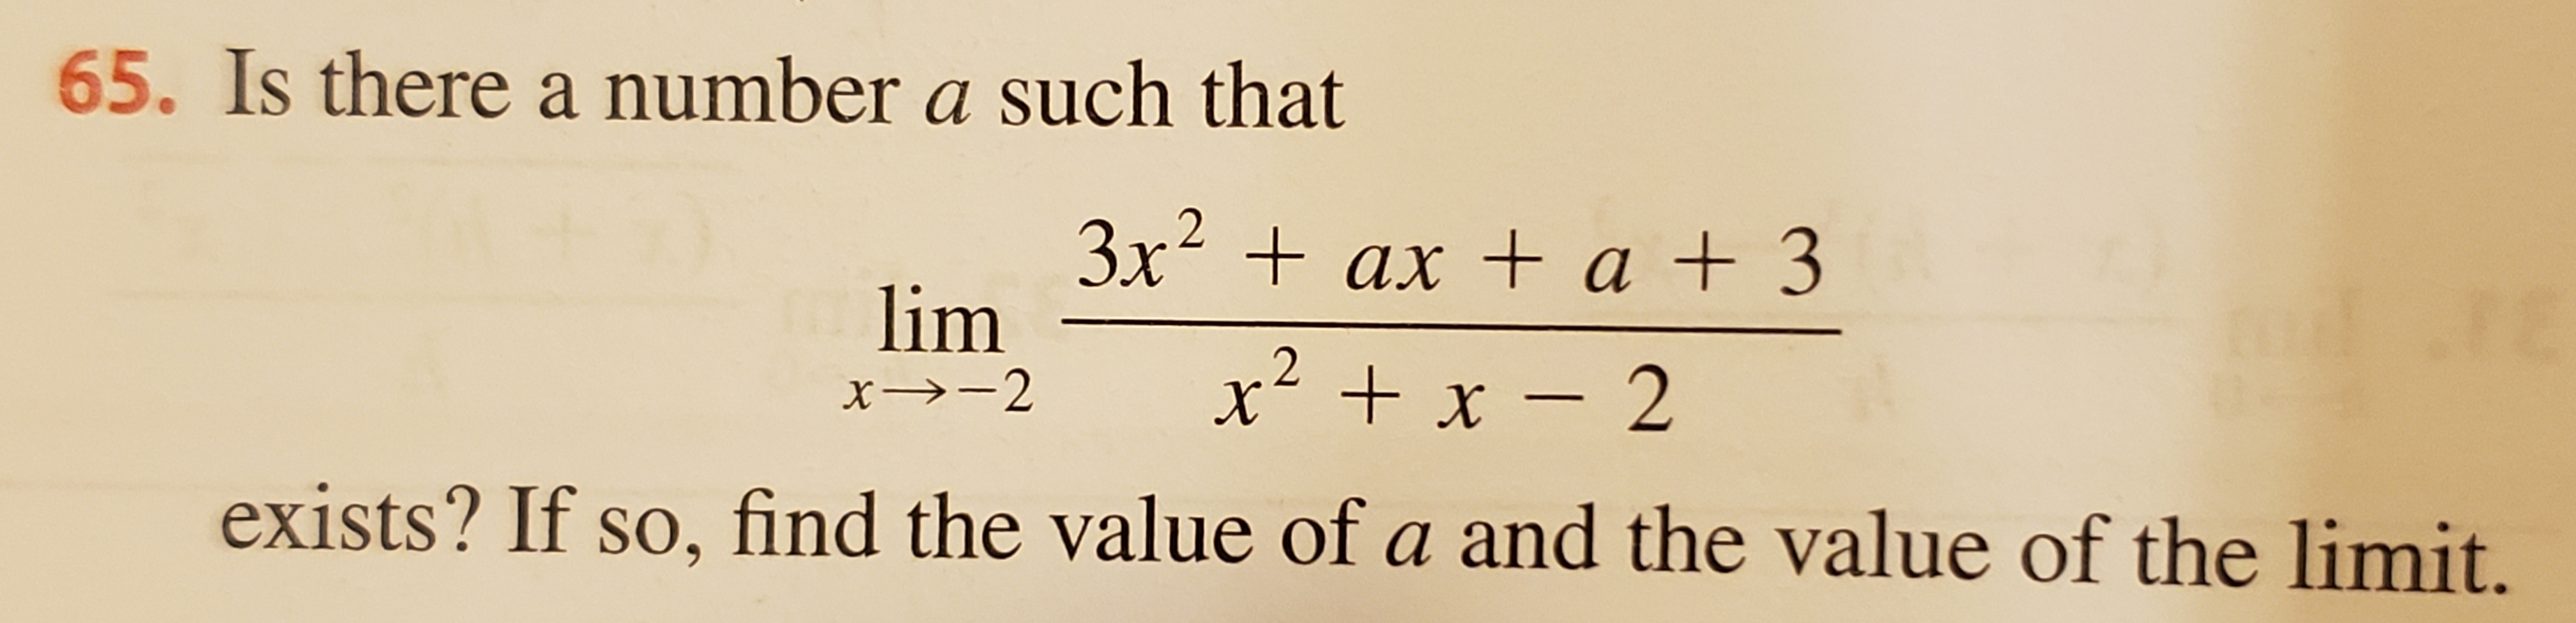 65. Is there a number a such that
3x2 ax a + 3
lim
+x-2
exists? If so, find the value of a and the value of the limit.
